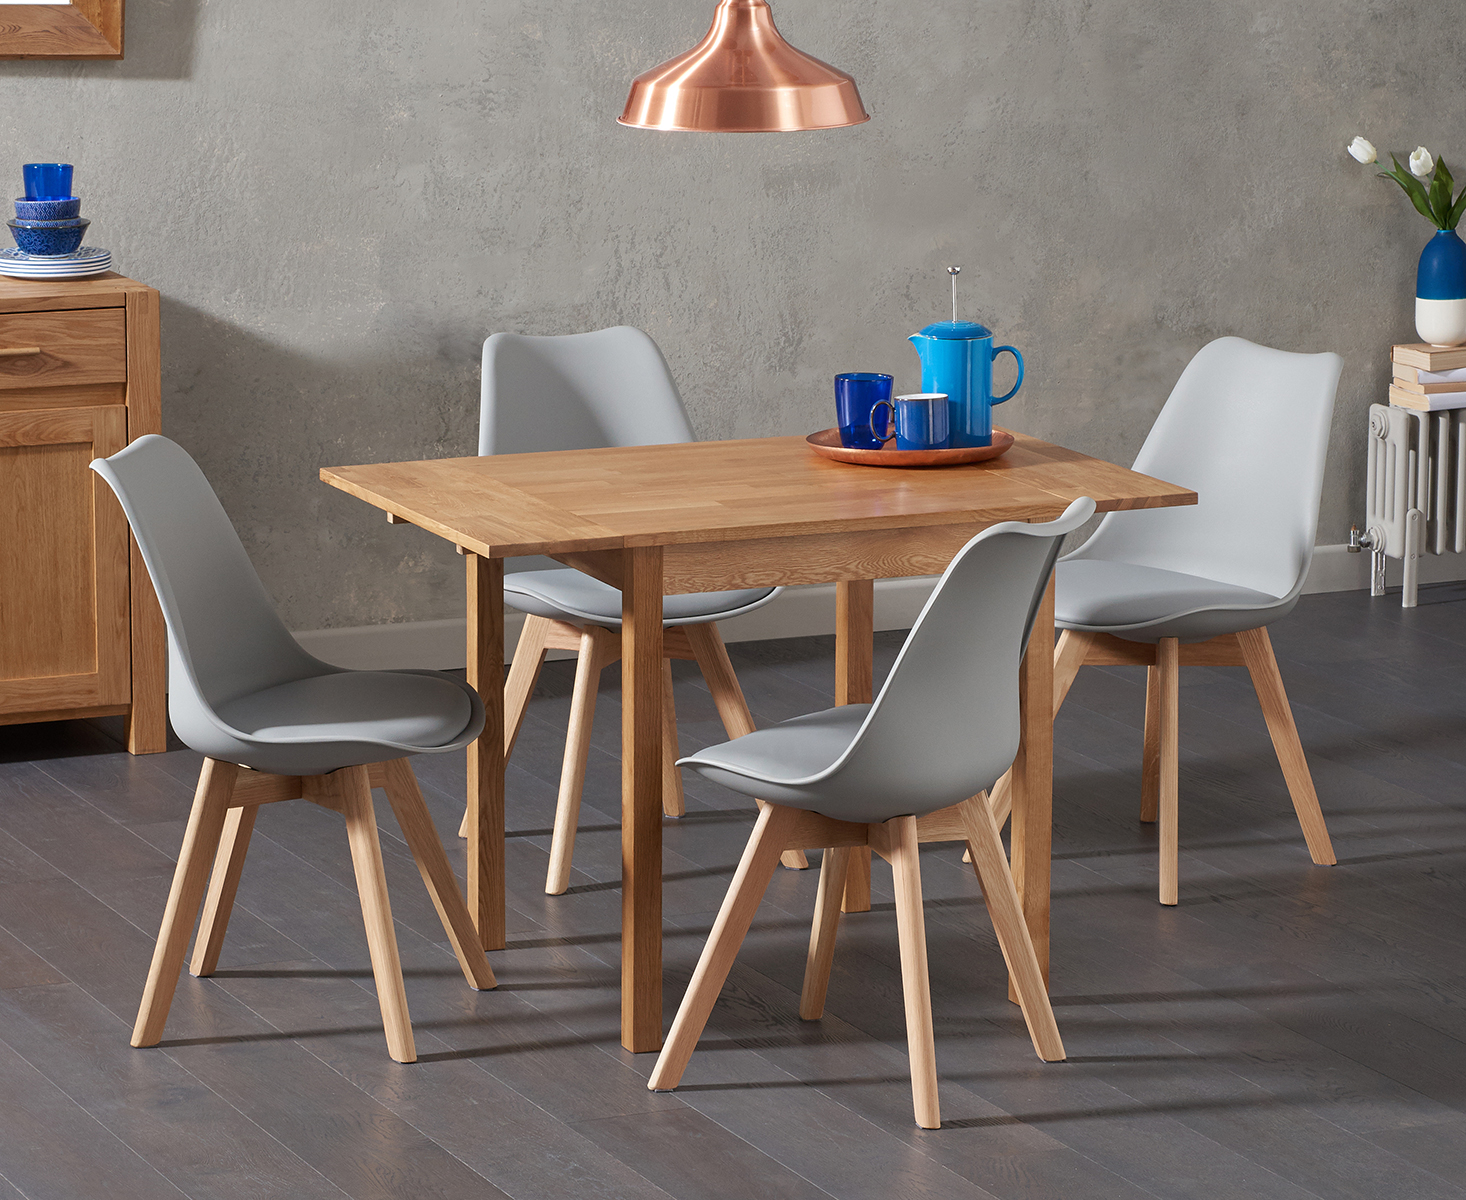 Extending York 70cm Solid Oak Dining Table With 2 Dark Grey Orson Faux Leather Chairs